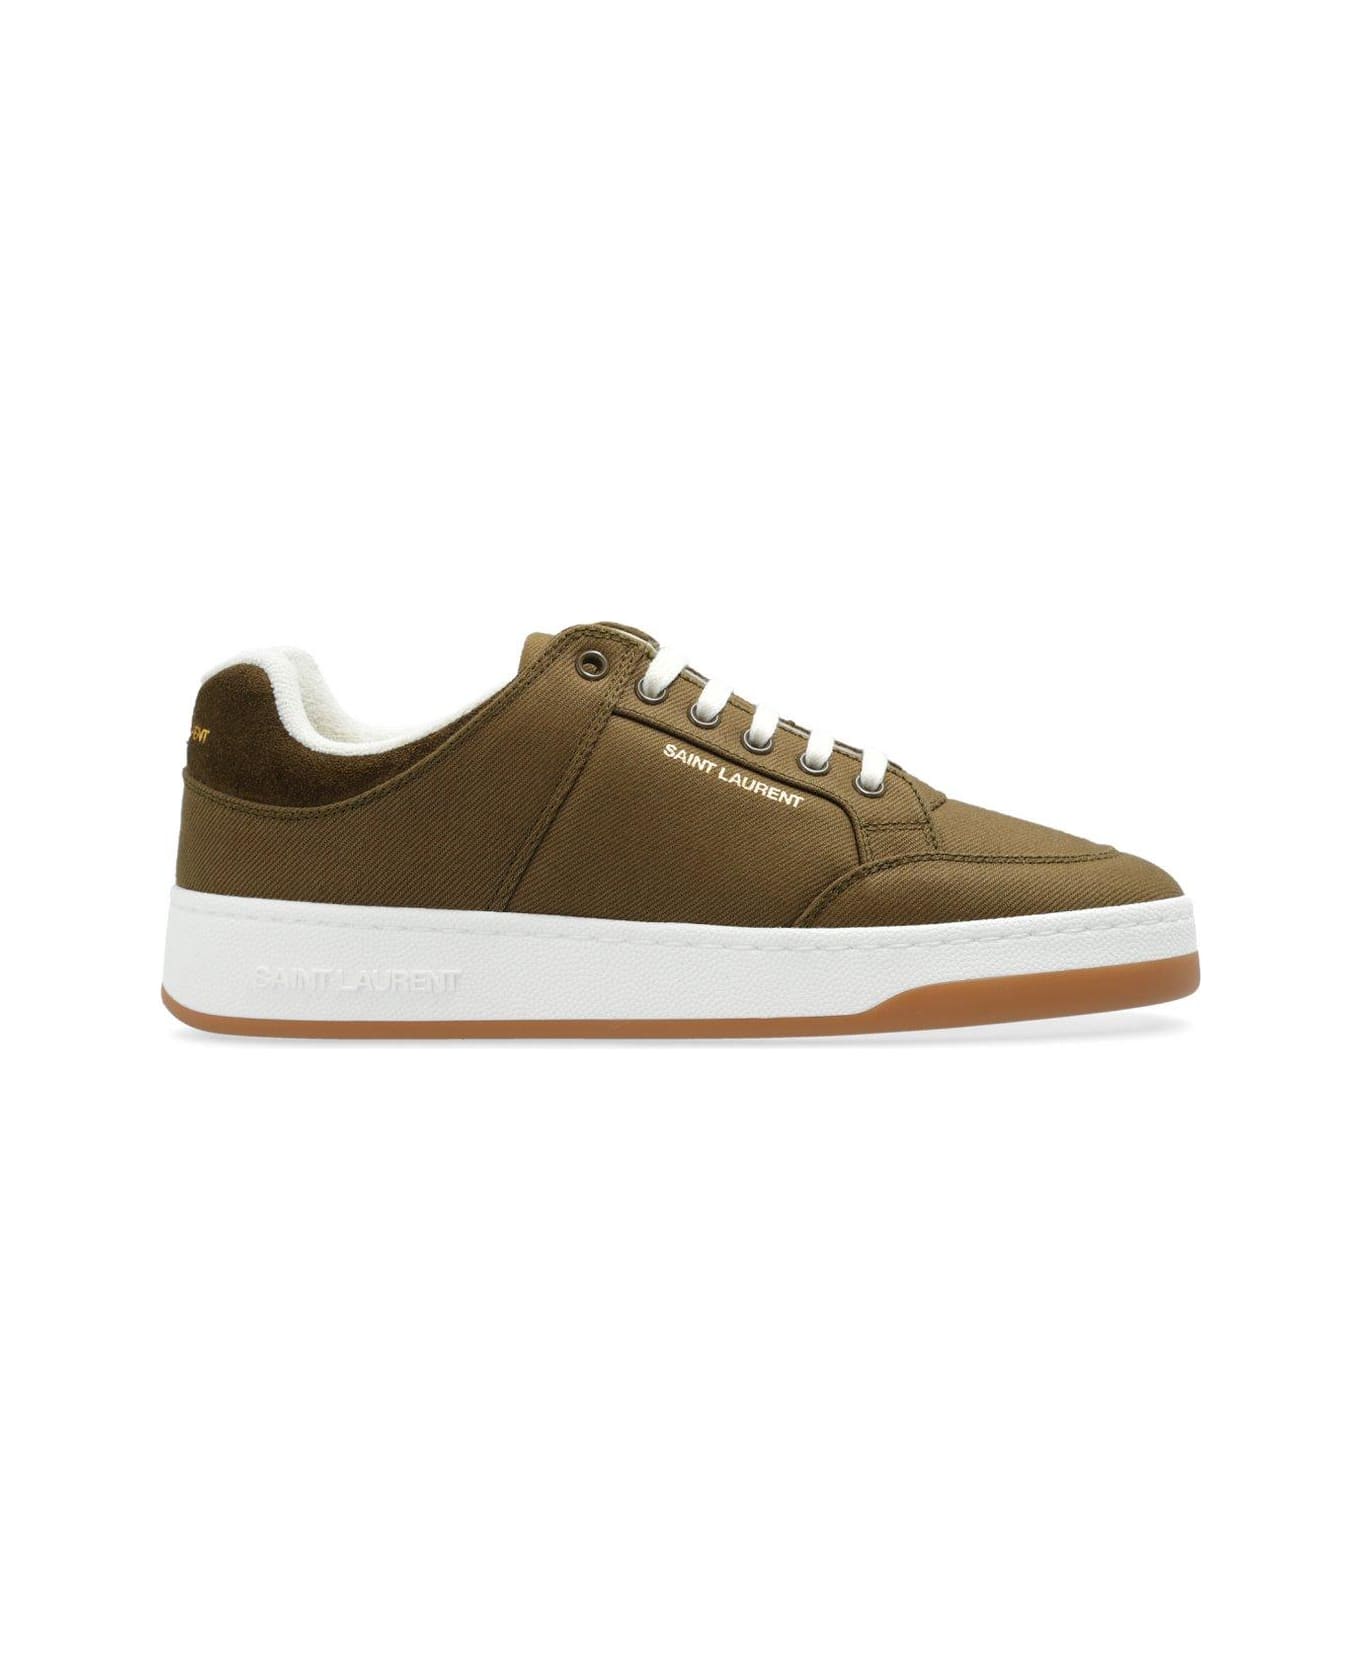 Saint Laurent Sl/61 Lace-up Sneakers - CACTUS/MILITARY GREE